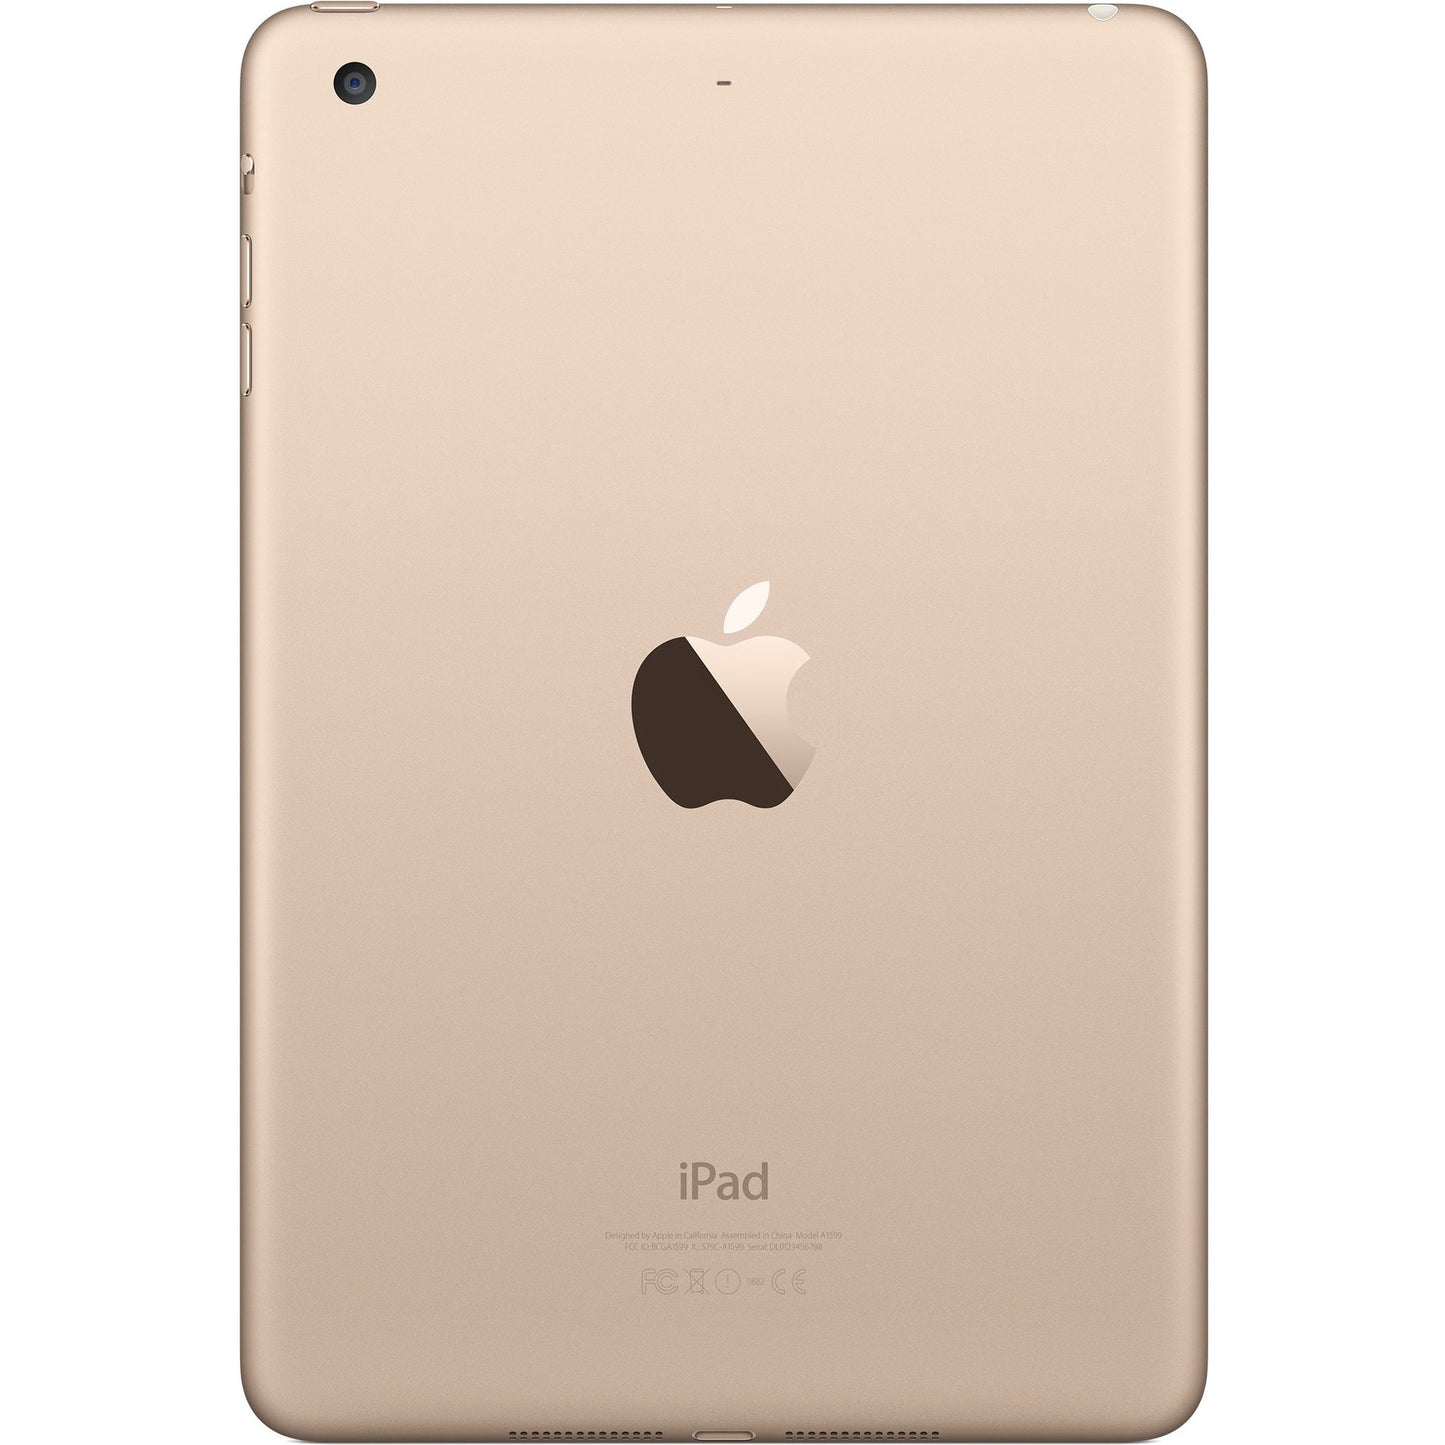 Apple iPad mini 3 MGYK2LL/A 128 GB Tablet - 7.9" 4:3 Multi-touch Screen - 2048 x 1536 - Retina Display, In-plane Switching (IPS) Technology - Apple A7 - iOS 8 - Gold